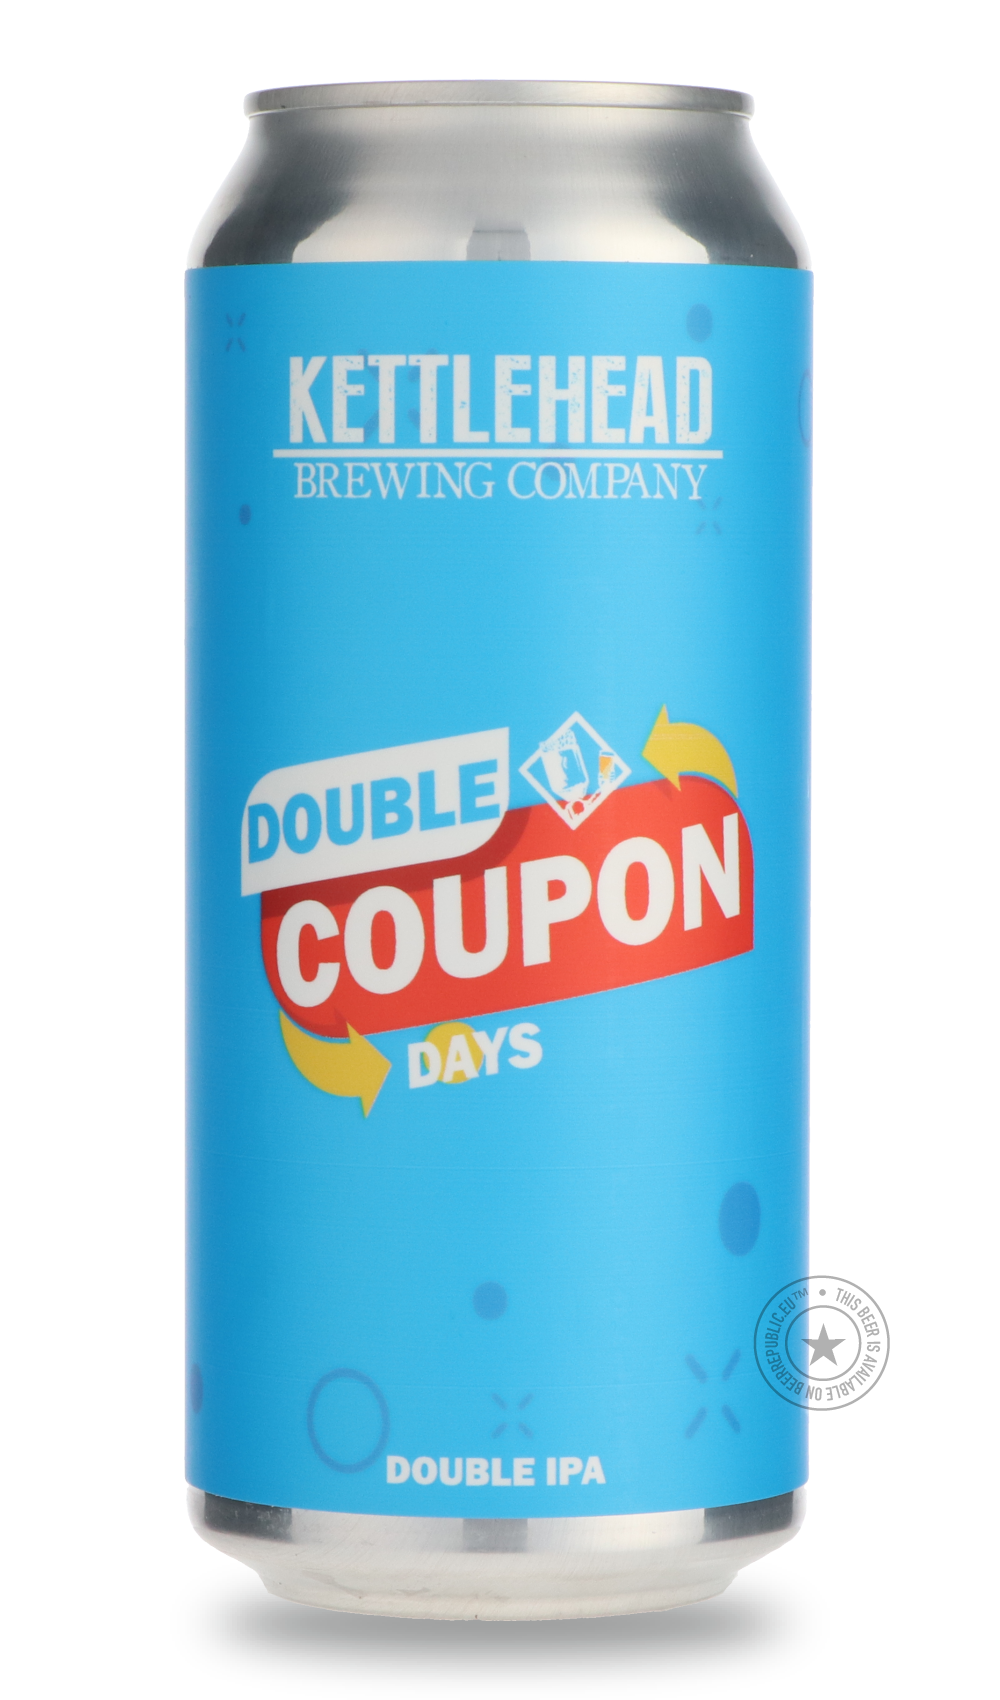 -Kettlehead- Double Coupon Days-IPA- Only @ Beer Republic - The best online beer store for American & Canadian craft beer - Buy beer online from the USA and Canada - Bier online kopen - Amerikaans bier kopen - Craft beer store - Craft beer kopen - Amerikanisch bier kaufen - Bier online kaufen - Acheter biere online - IPA - Stout - Porter - New England IPA - Hazy IPA - Imperial Stout - Barrel Aged - Barrel Aged Imperial Stout - Brown - Dark beer - Blond - Blonde - Pilsner - Lager - Wheat - Weizen - Amber - B